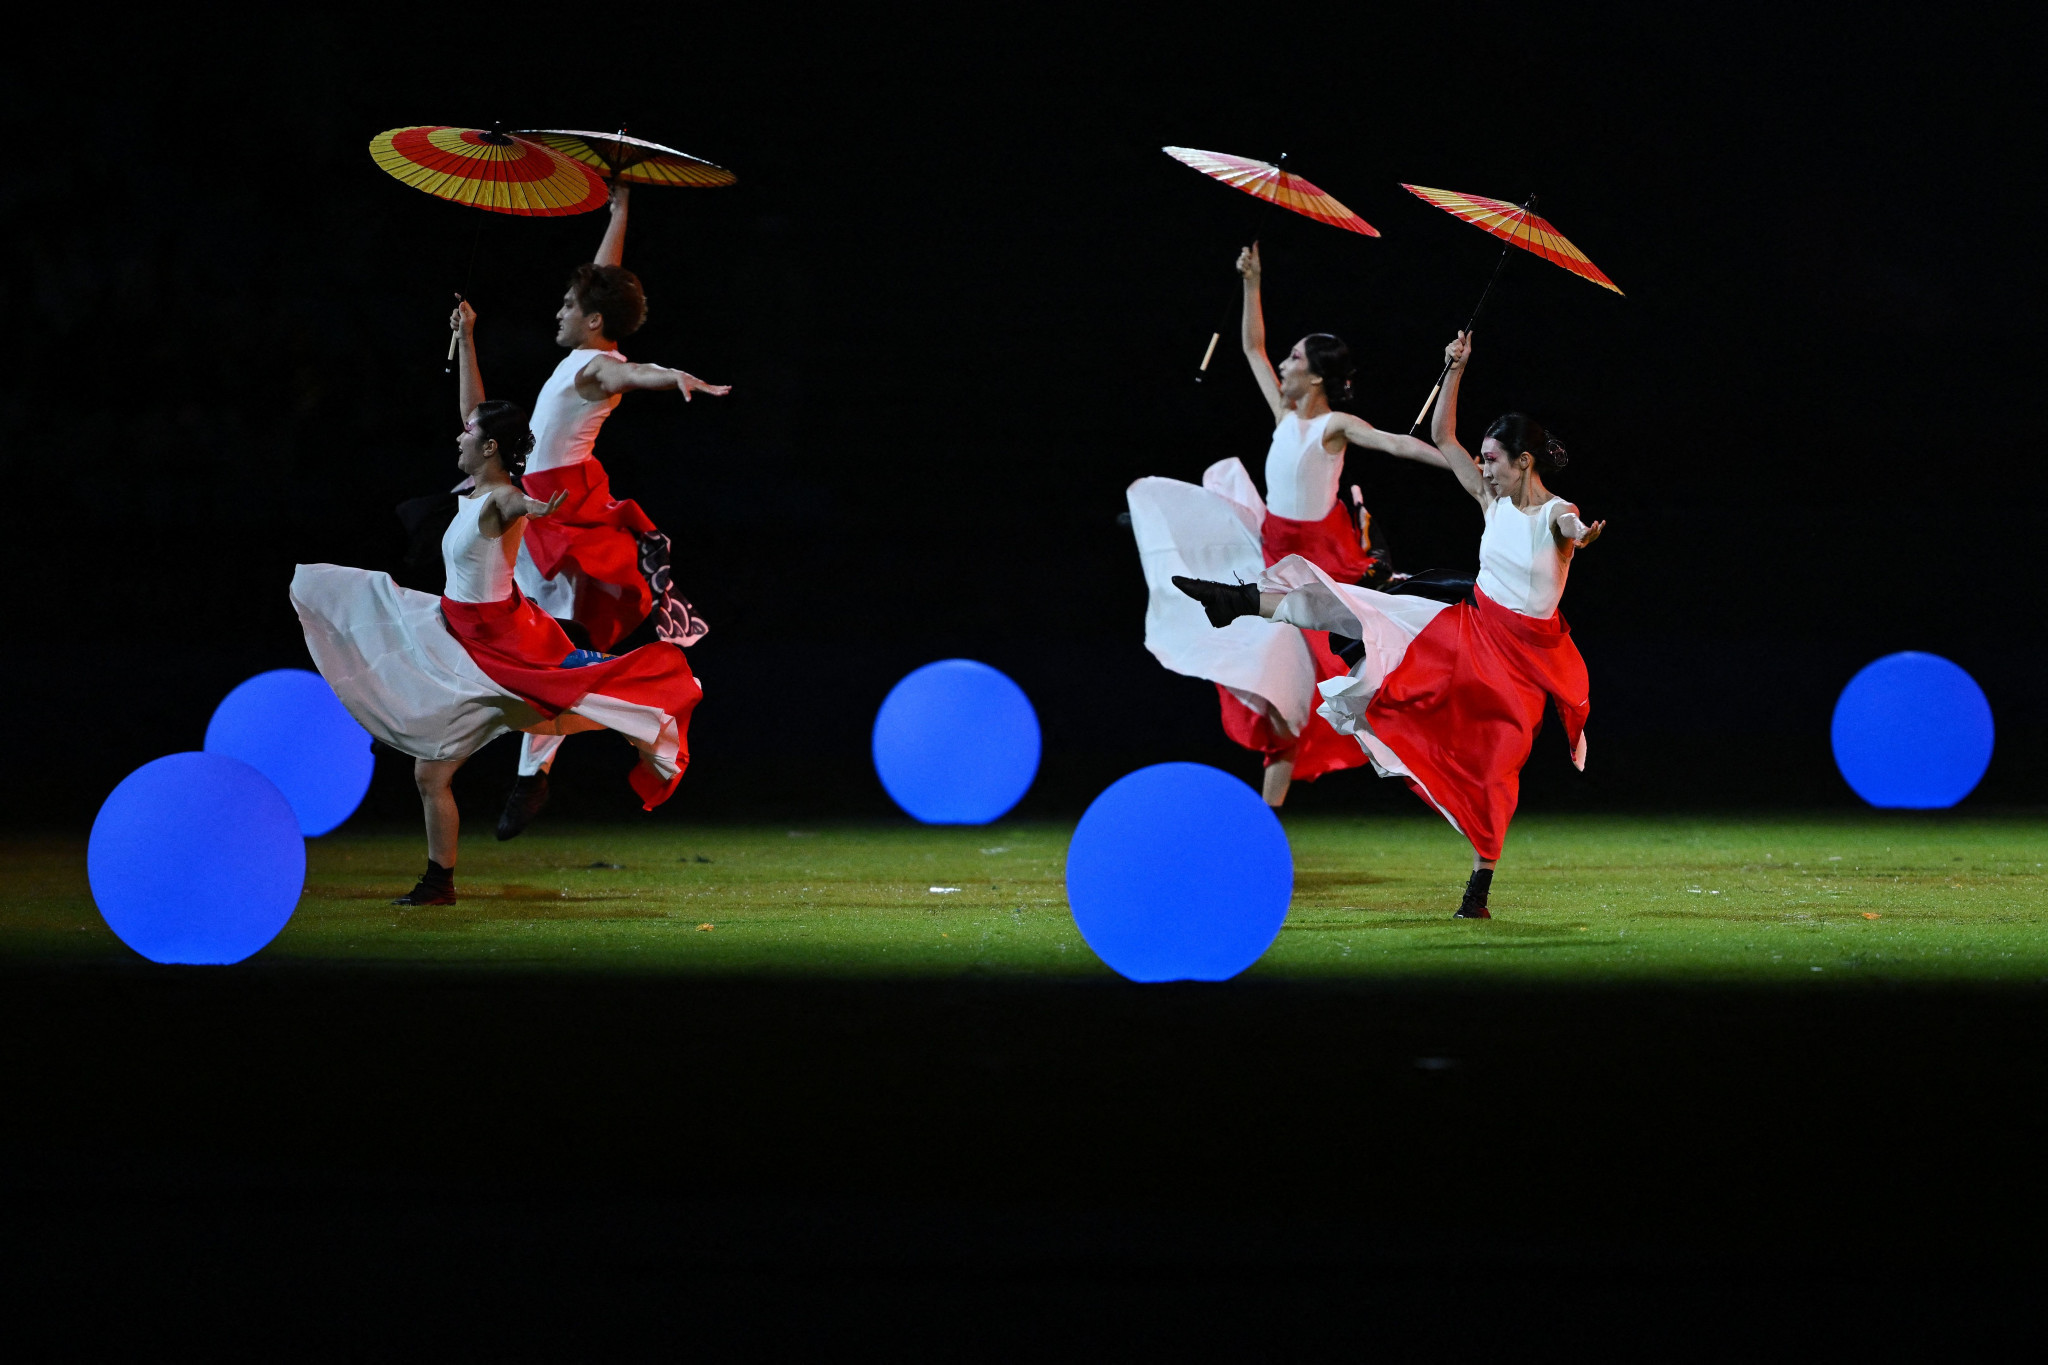 Japanese performers promote Aichi-Nagoya and generate excitement for the Asian Games in three years' time ©Getty Images